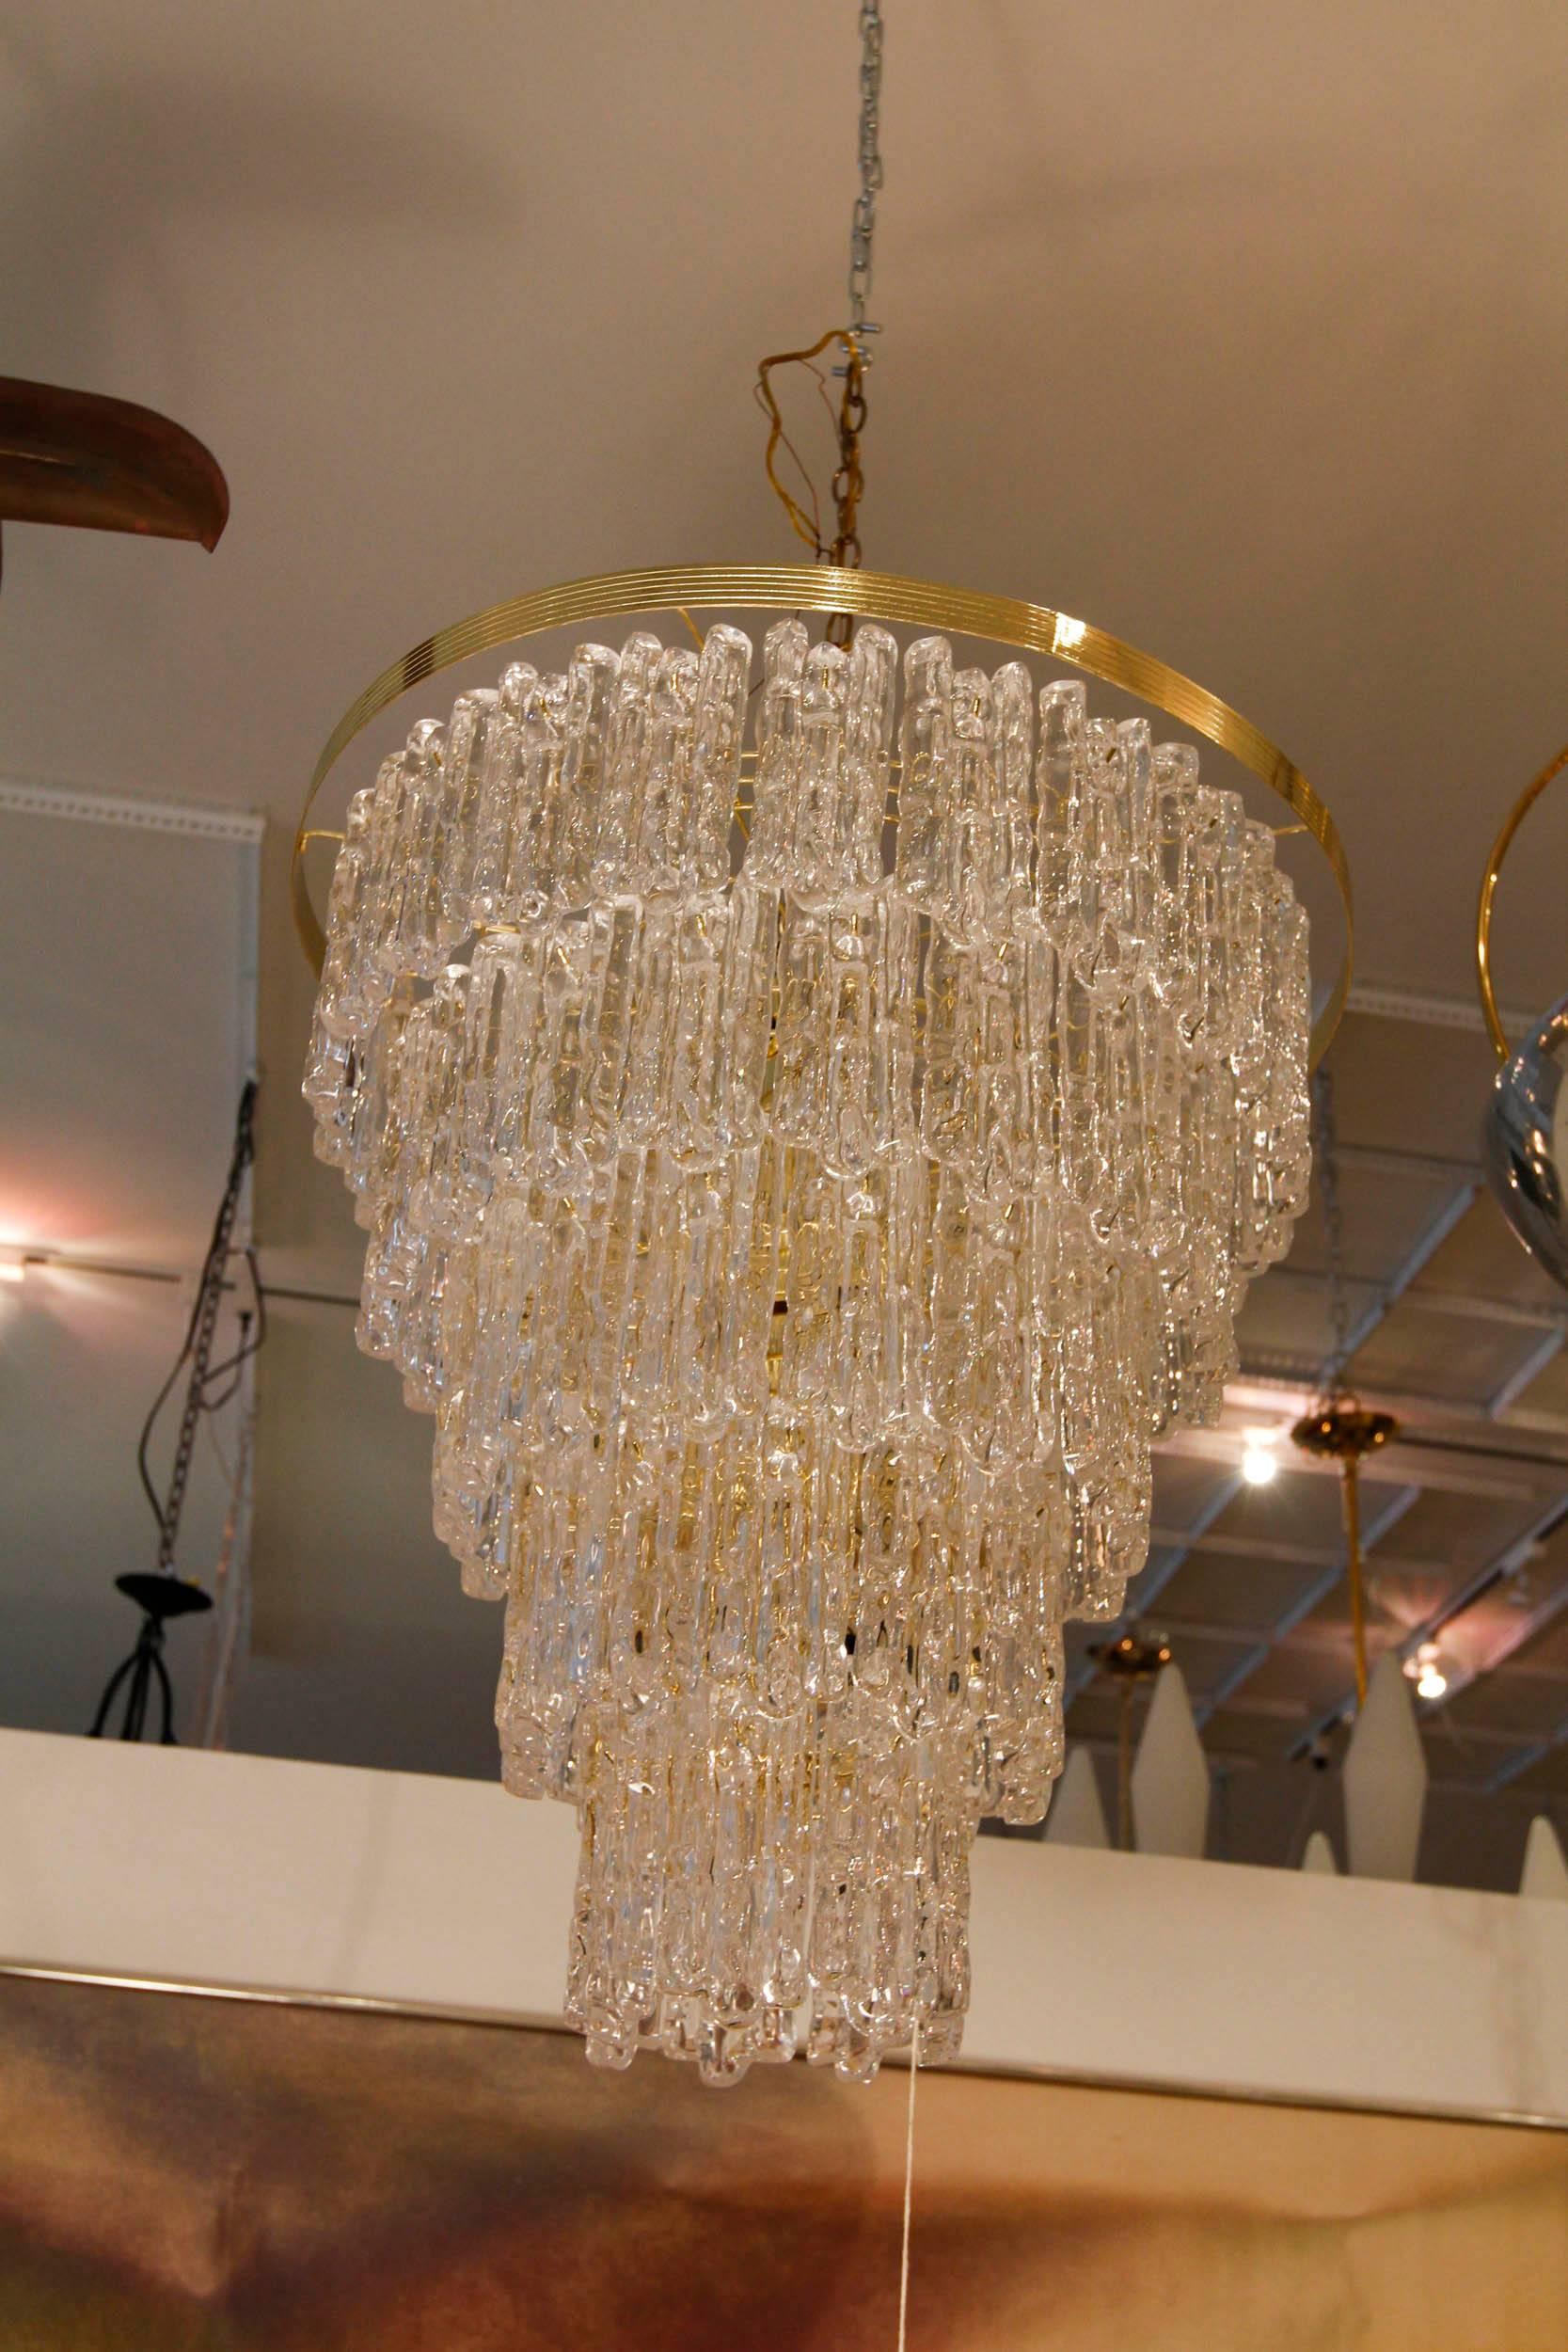 Vintage multi-tier acrylic chandelier with heavily textured panels, sculpted to look like ice.